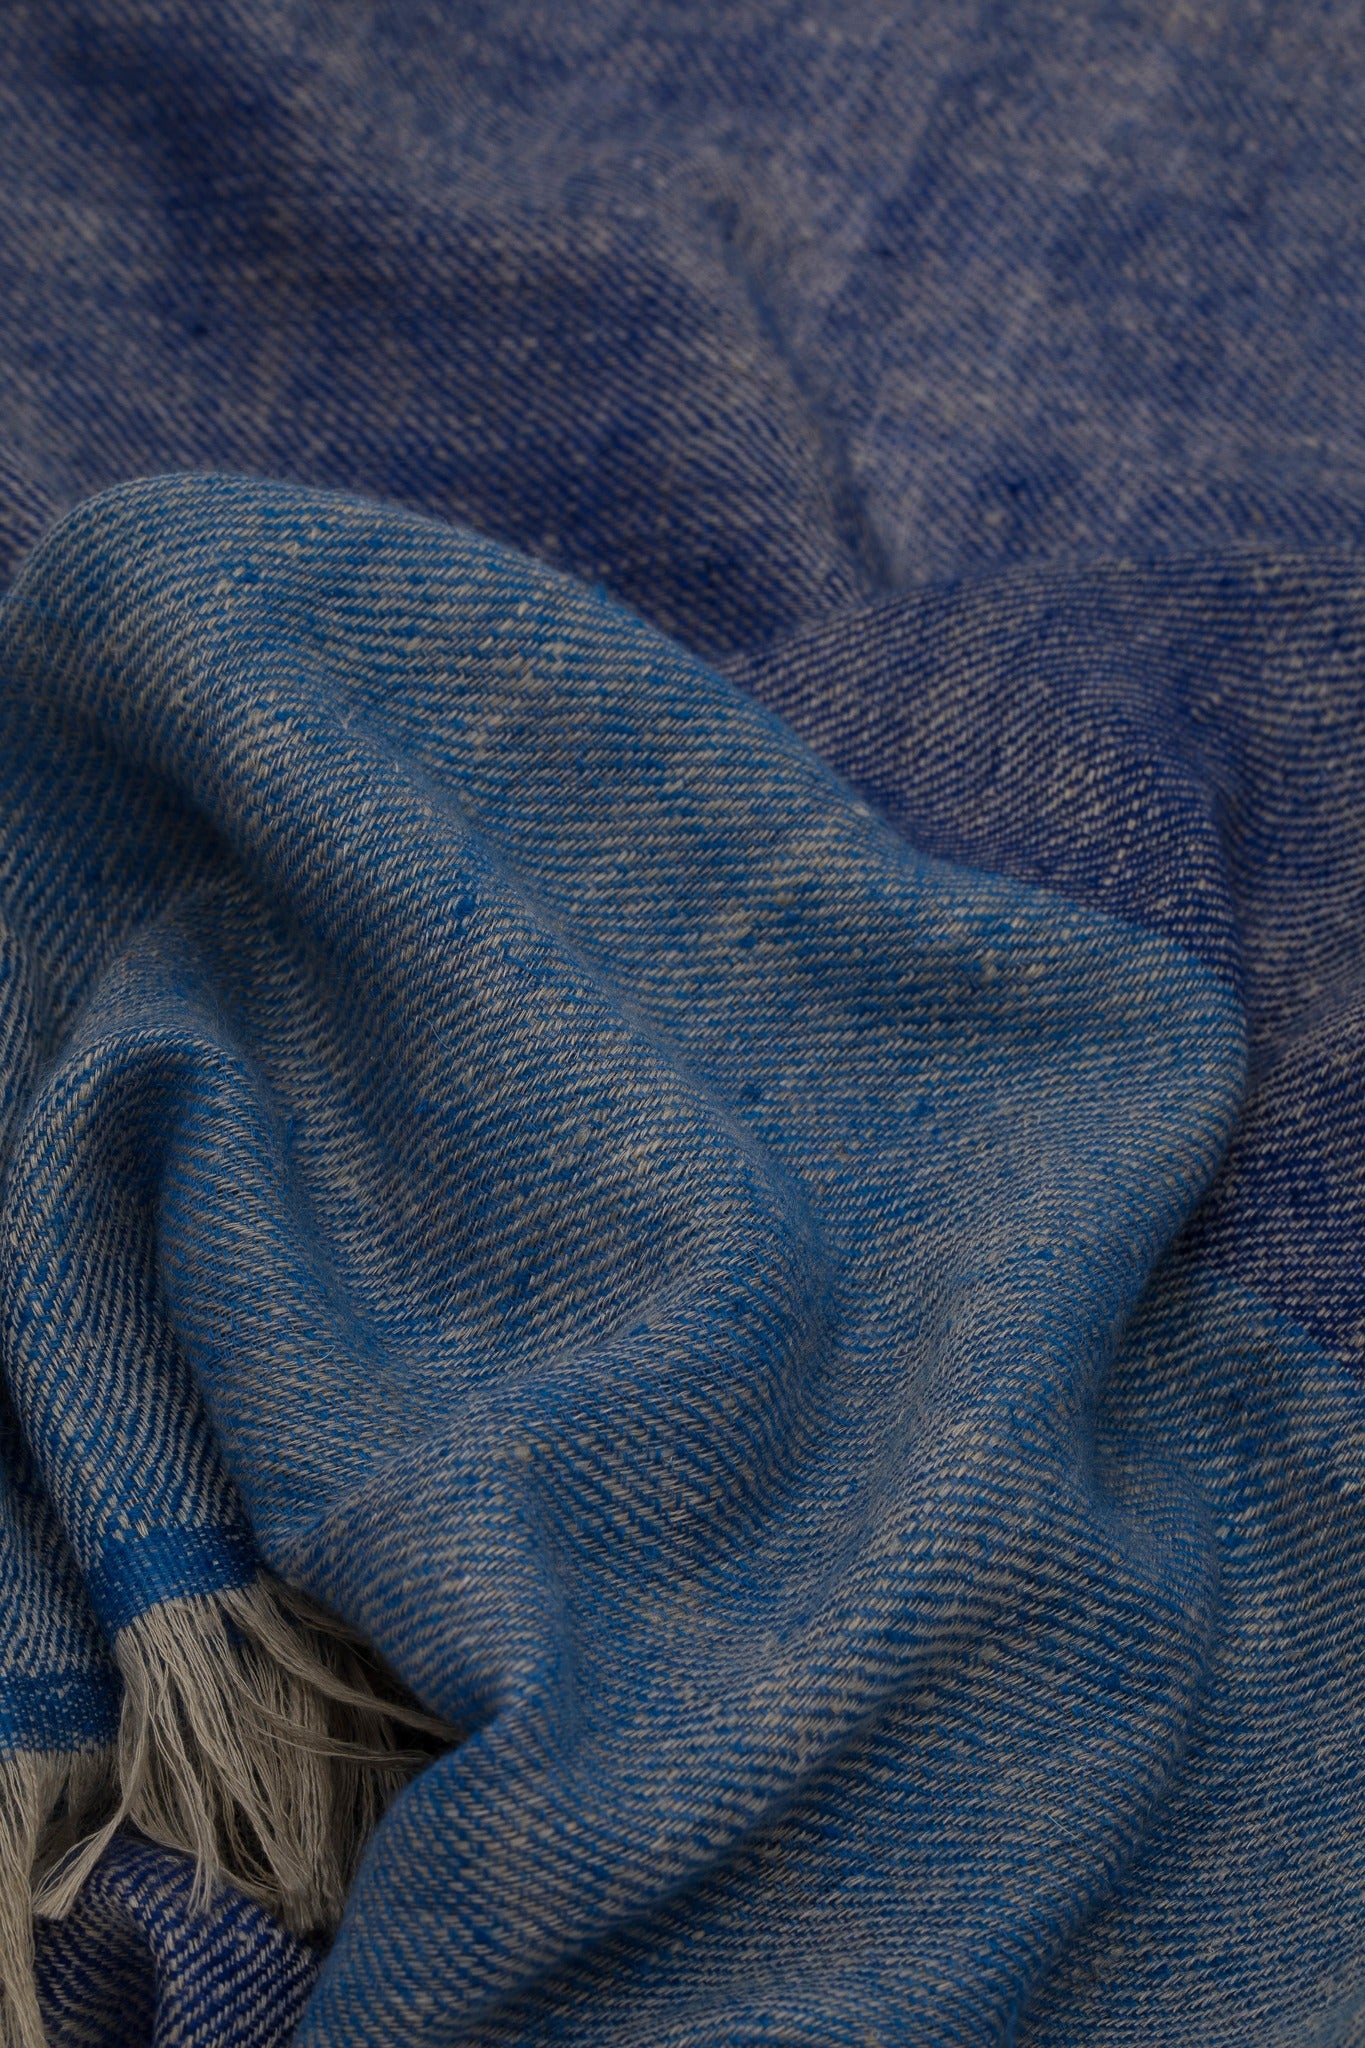 Close View Of Natural Fibres Of Blue Pure Pashmina Cashmere Luxury Scarf